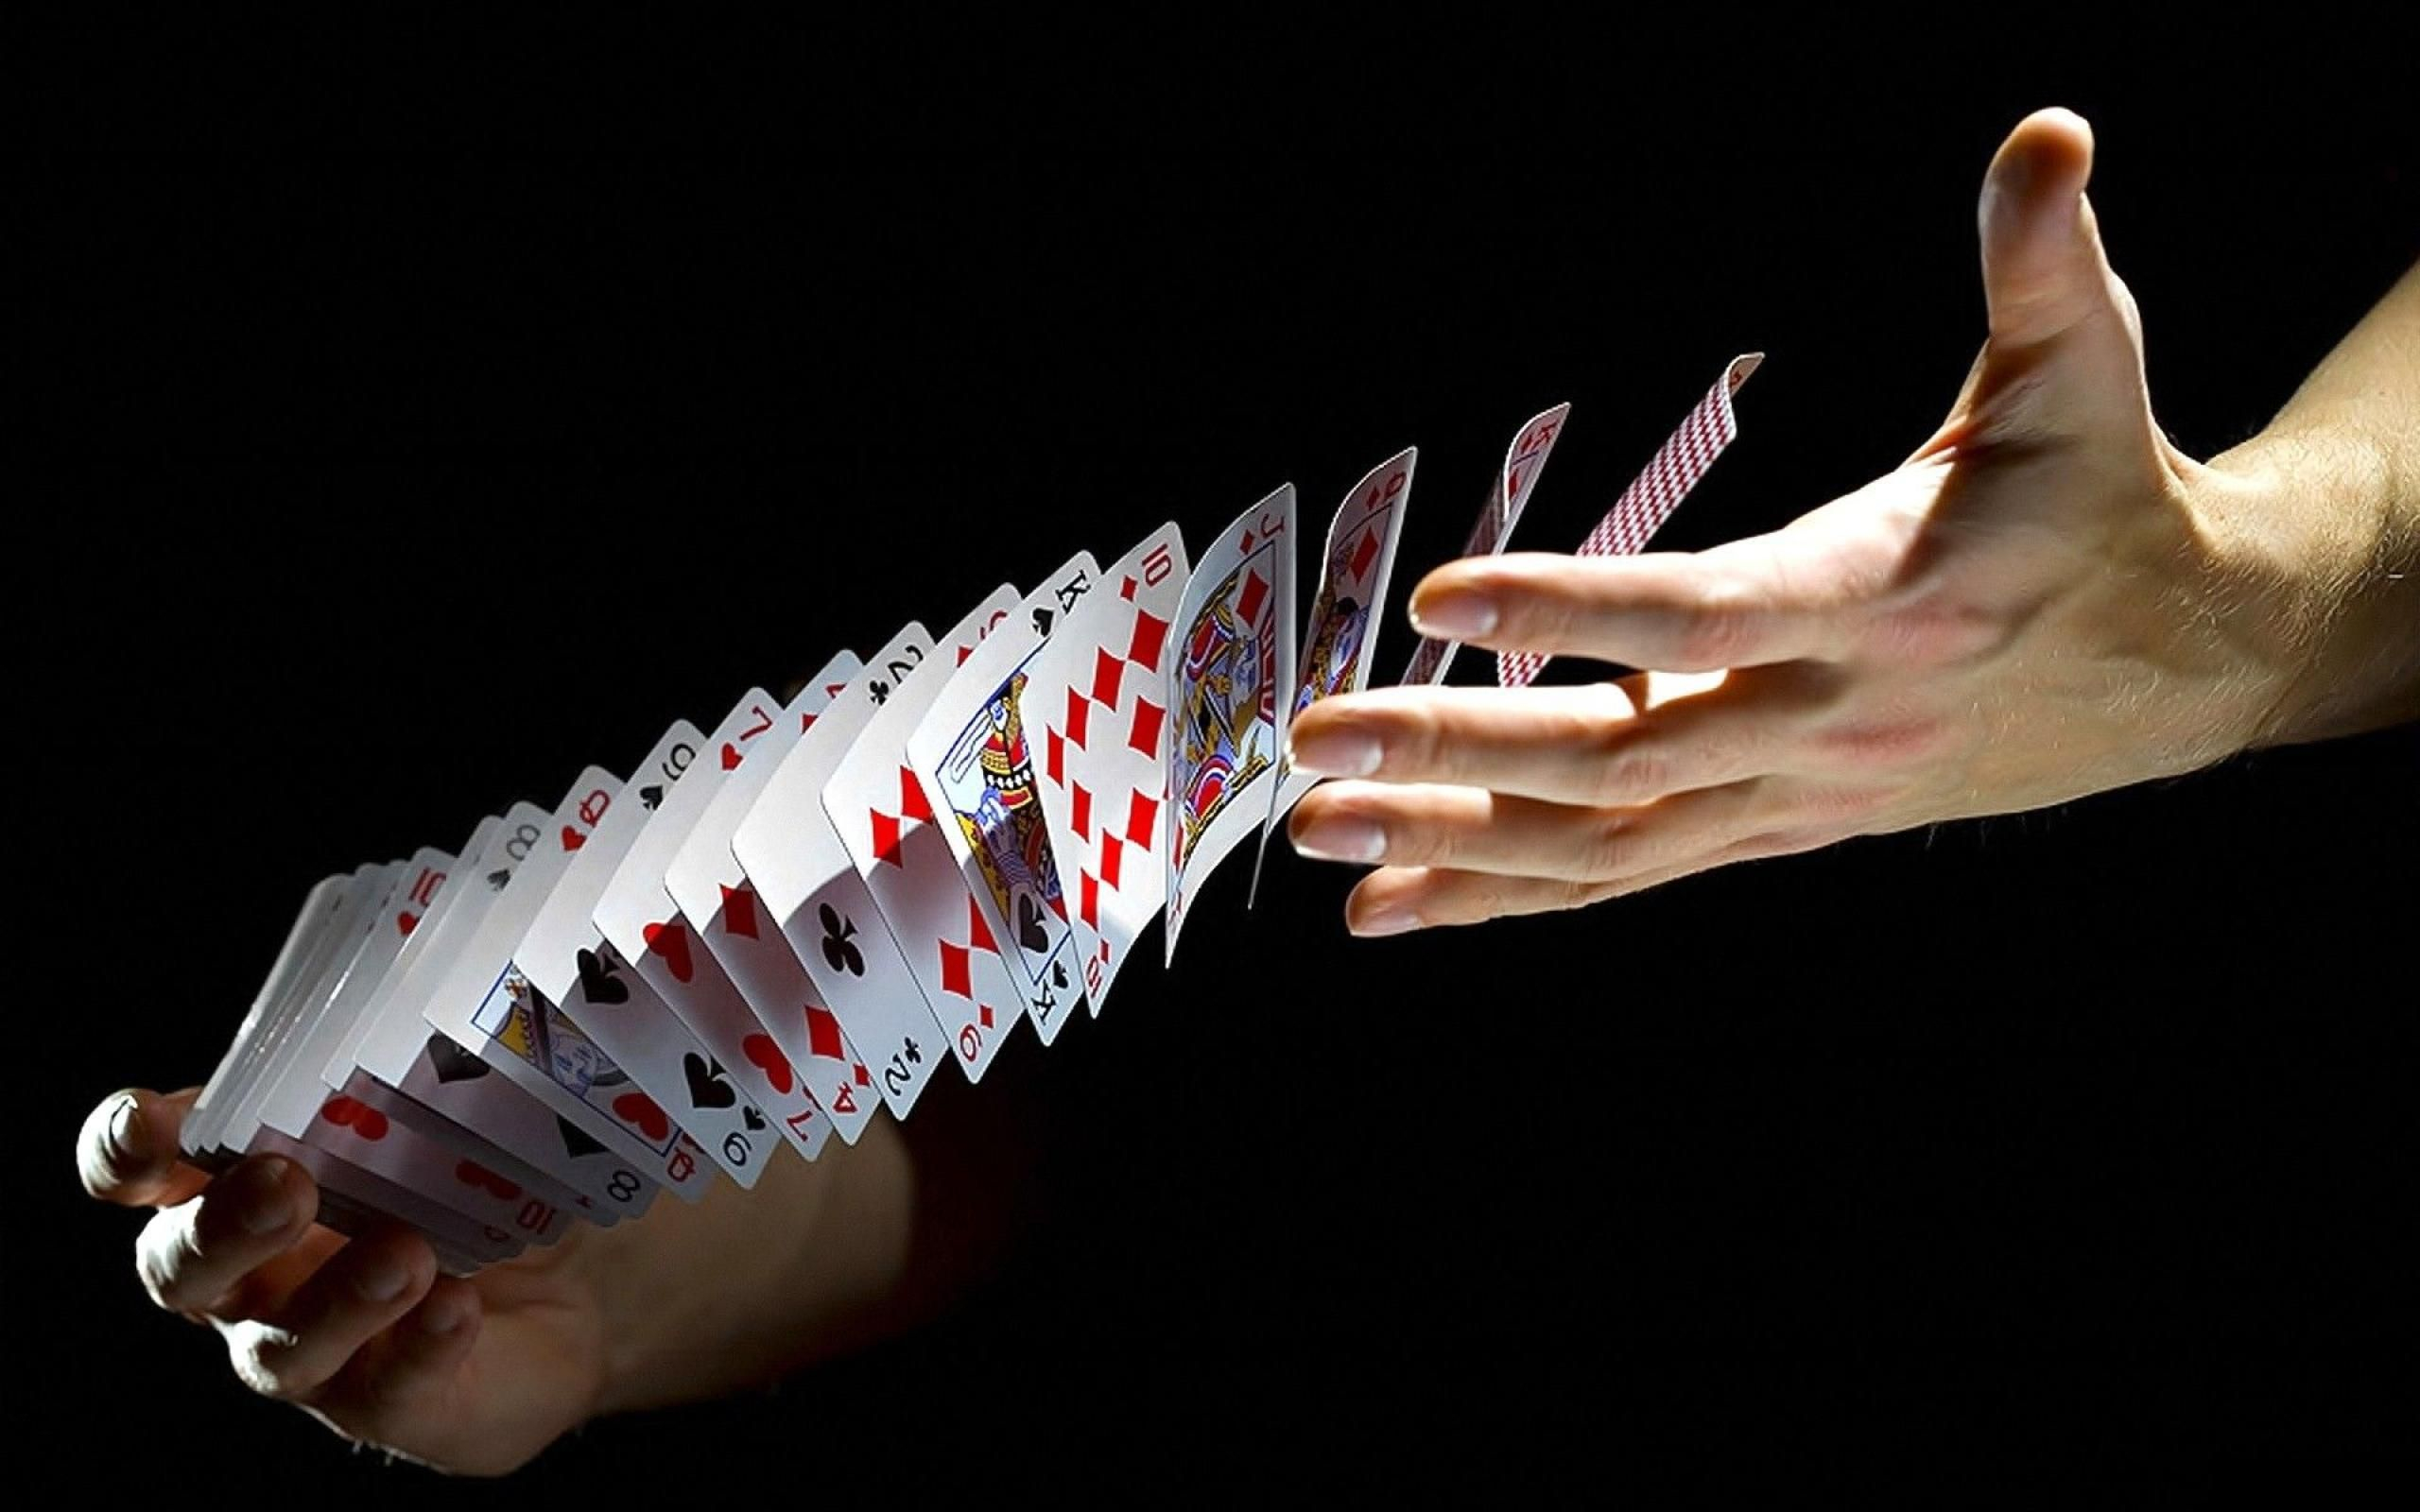 2560x1600 Wallpapers Palying Cards Poker Playing Design | Card tricks, Poker, Playing card deck